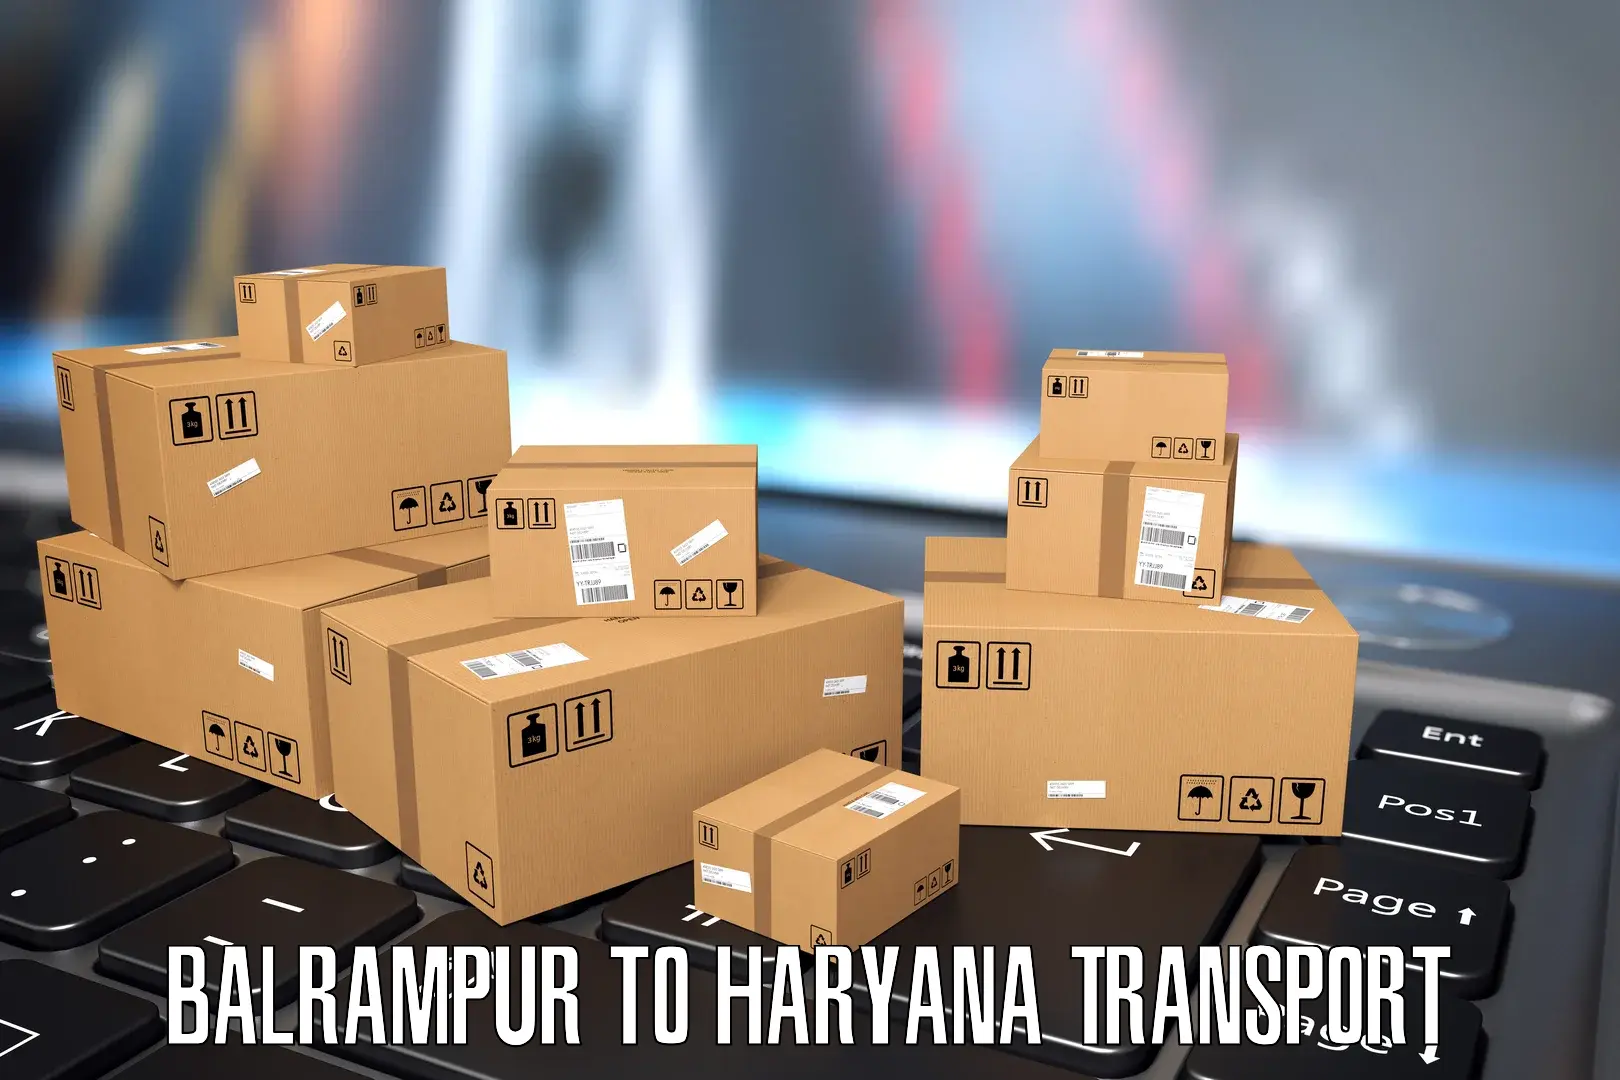 Parcel transport services Balrampur to NCR Haryana